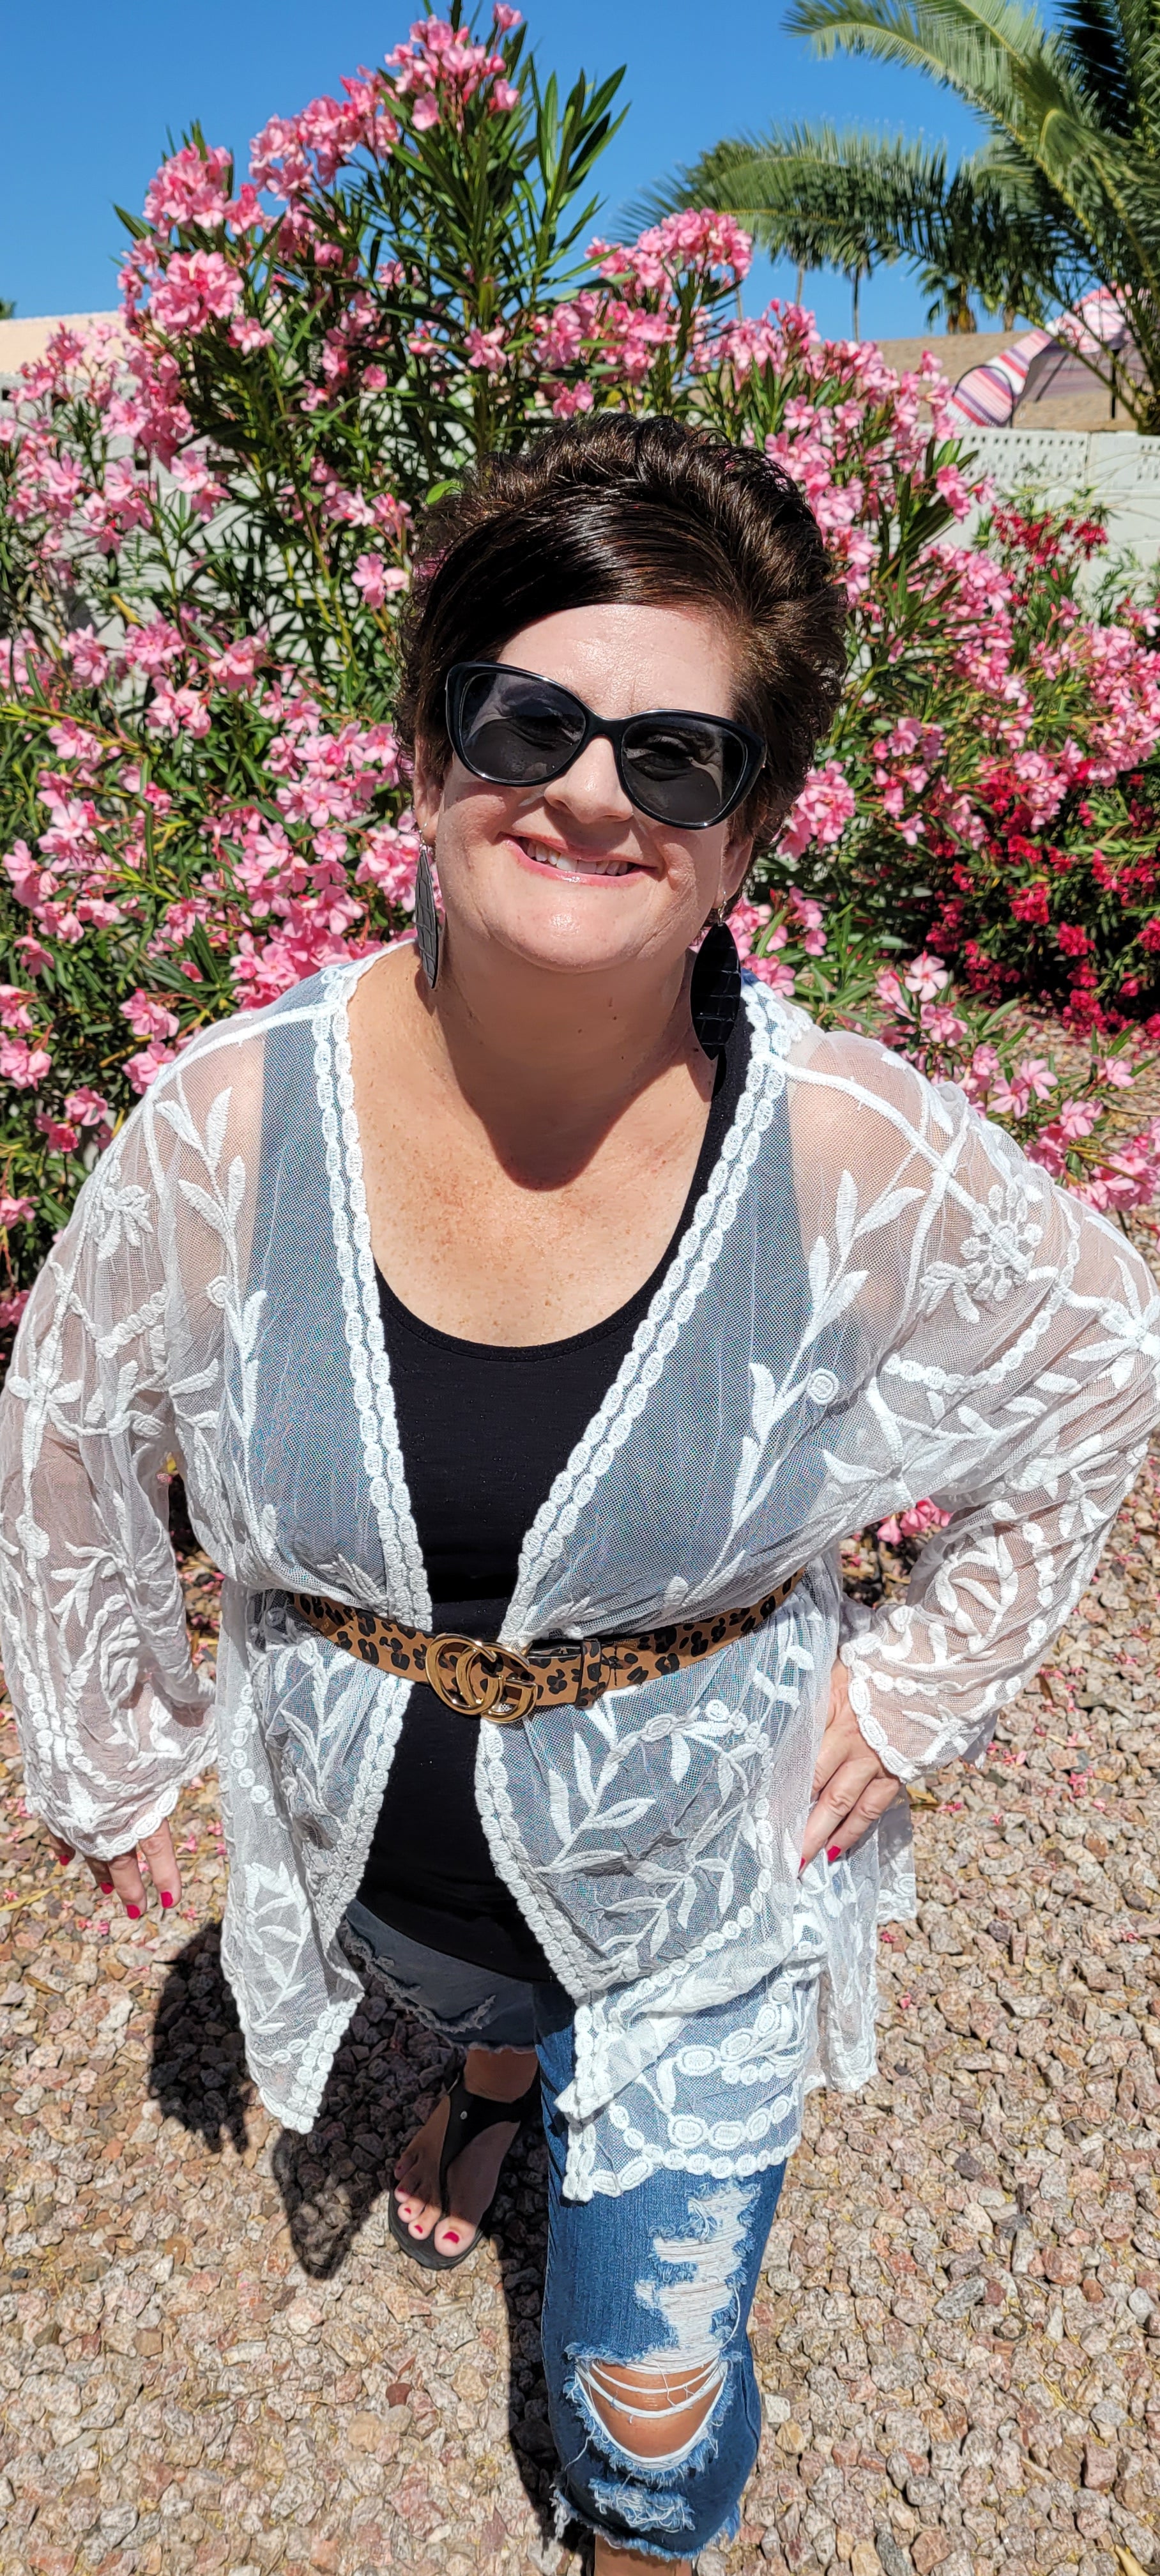 “The Beach Is Calling” is a sheer lightweight kimono. This kimono features an open front, long bell sleeves, scalloped hemline, and crochet leaf design. This is the perfect lightweight essential. This white kimono is very versatile. You can dress this up or take it to the beach! The choice is yours! Sizes small/medium and medium/large.